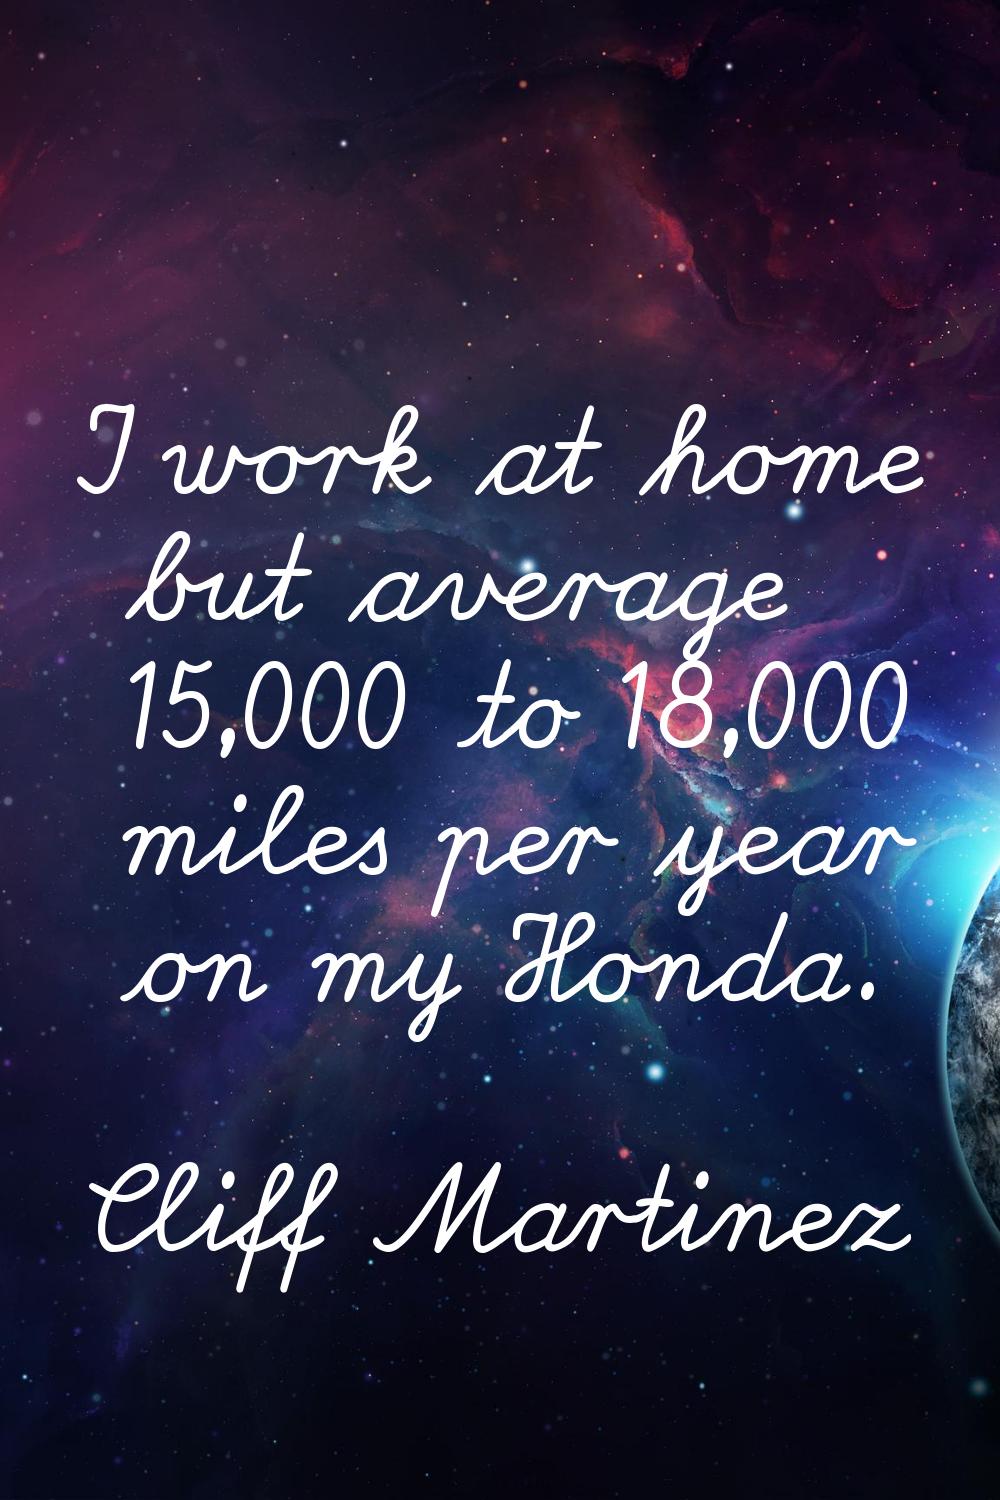 I work at home but average 15,000 to 18,000 miles per year on my Honda.